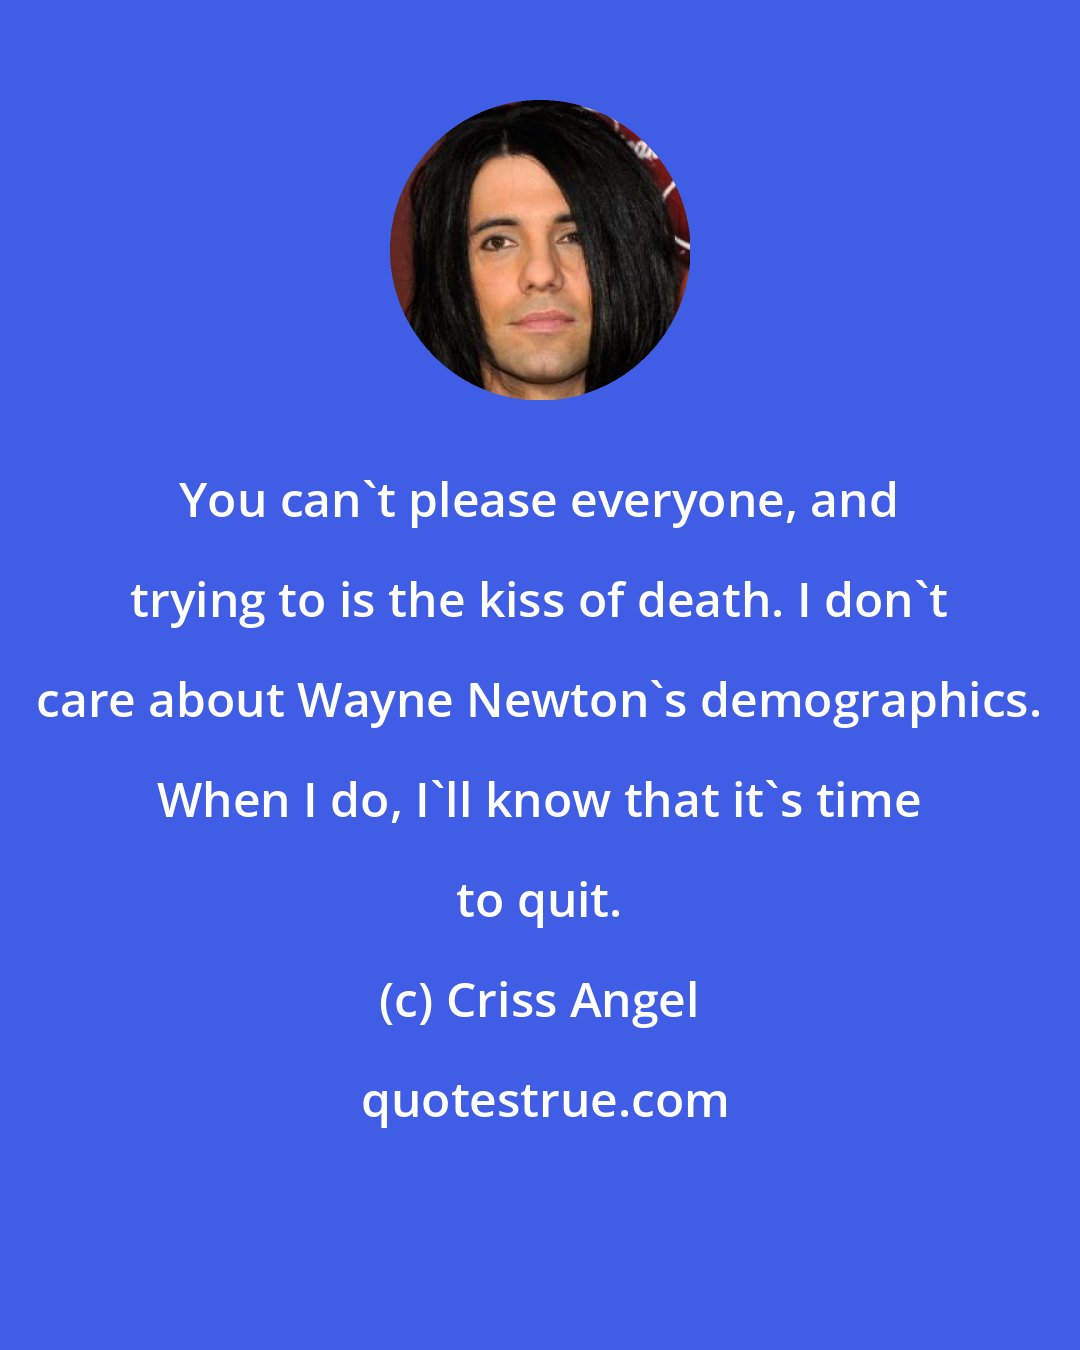 Criss Angel: You can't please everyone, and trying to is the kiss of death. I don't care about Wayne Newton's demographics. When I do, I'll know that it's time to quit.